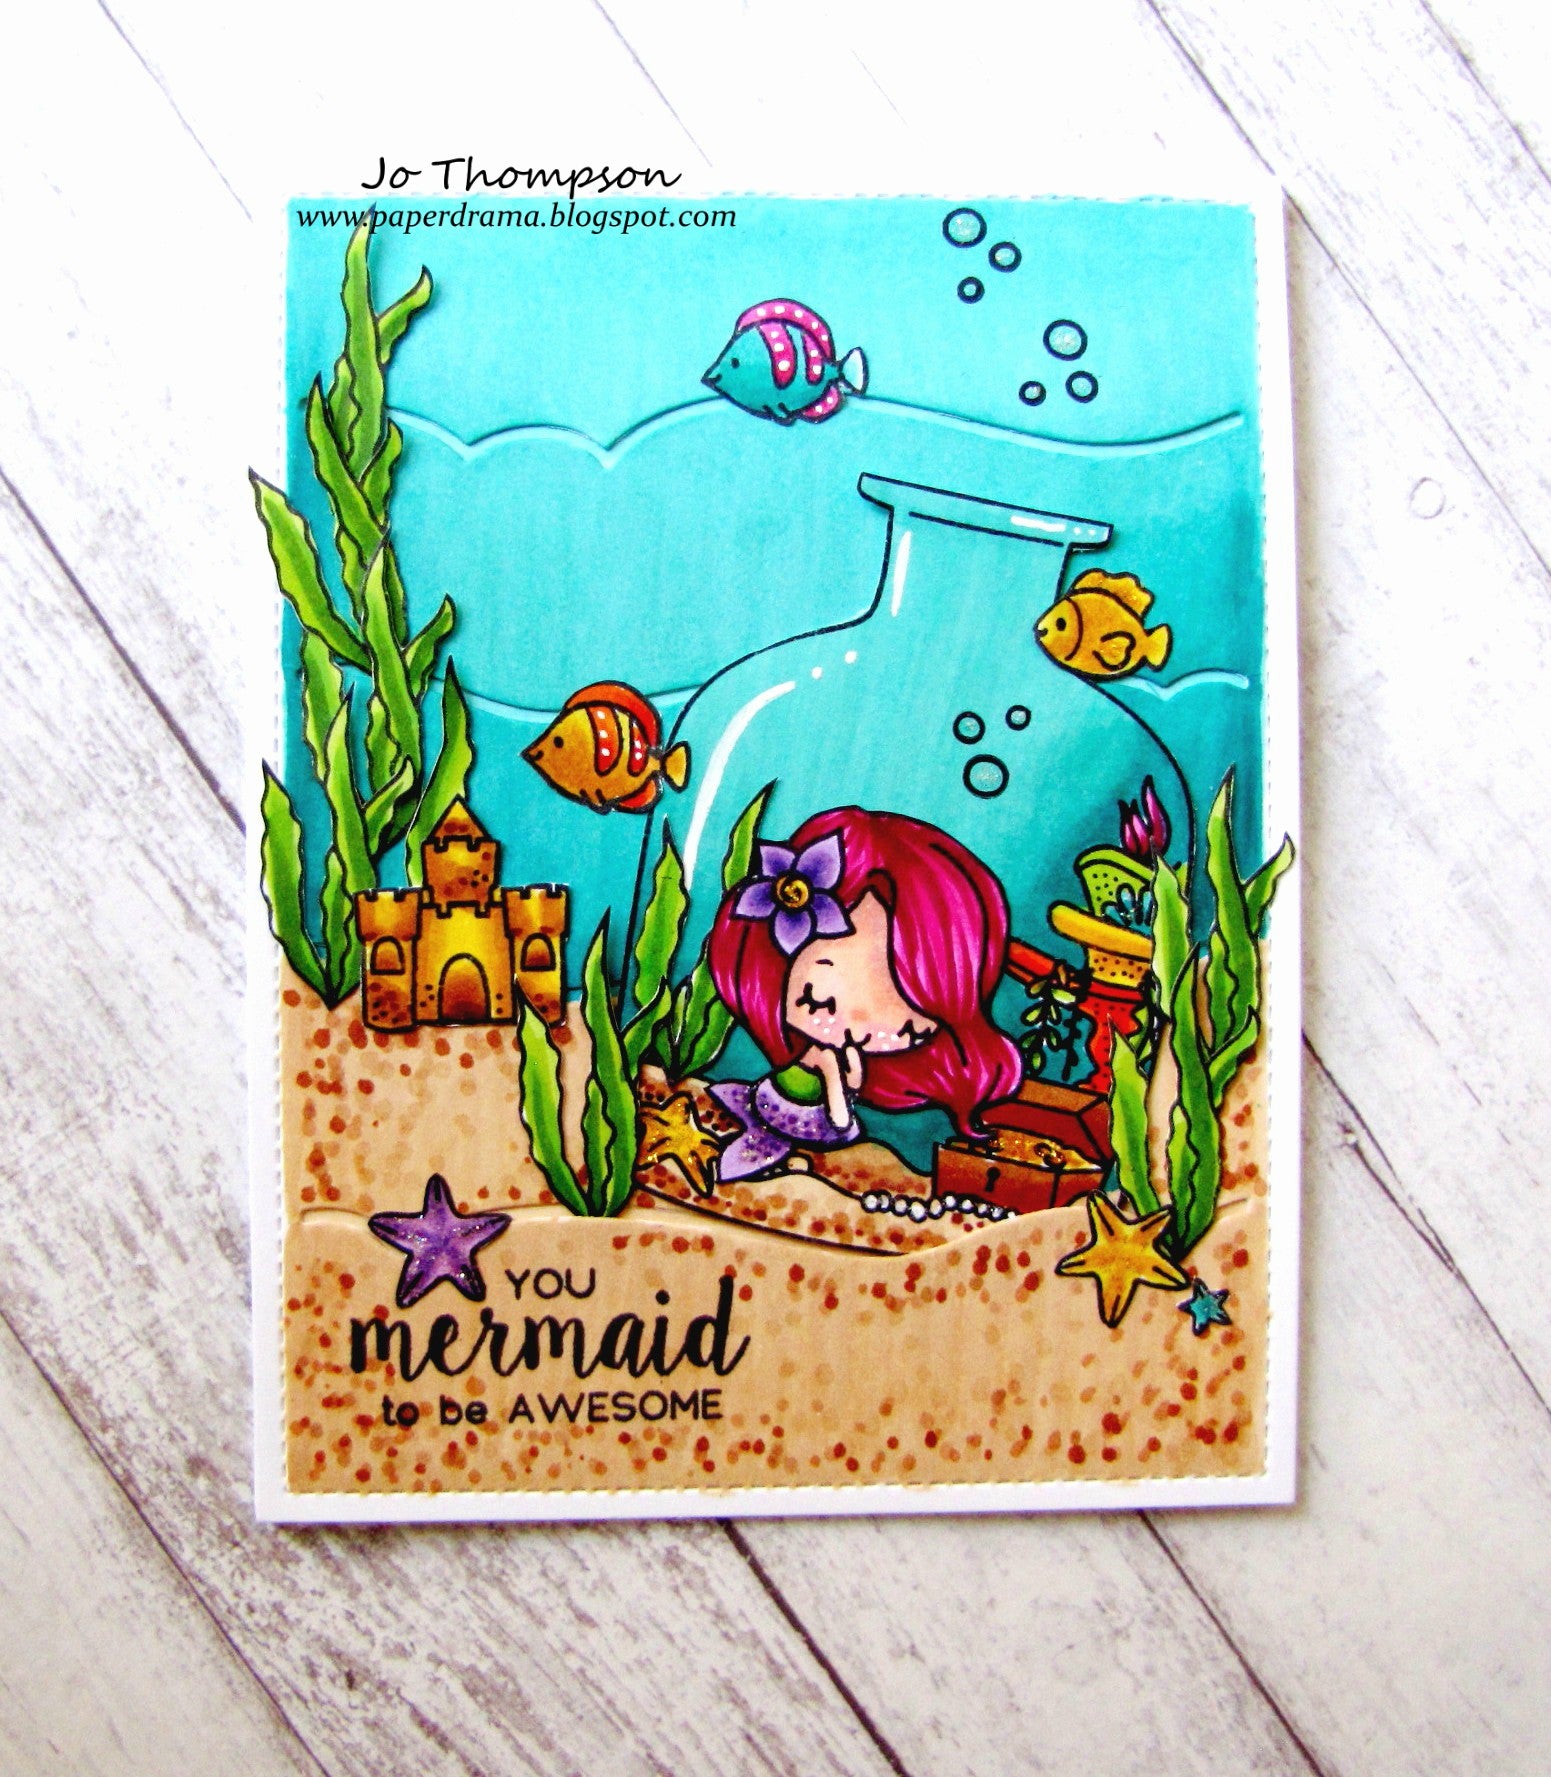 Guest Designer Jo with an AWESOME MERMAID card!